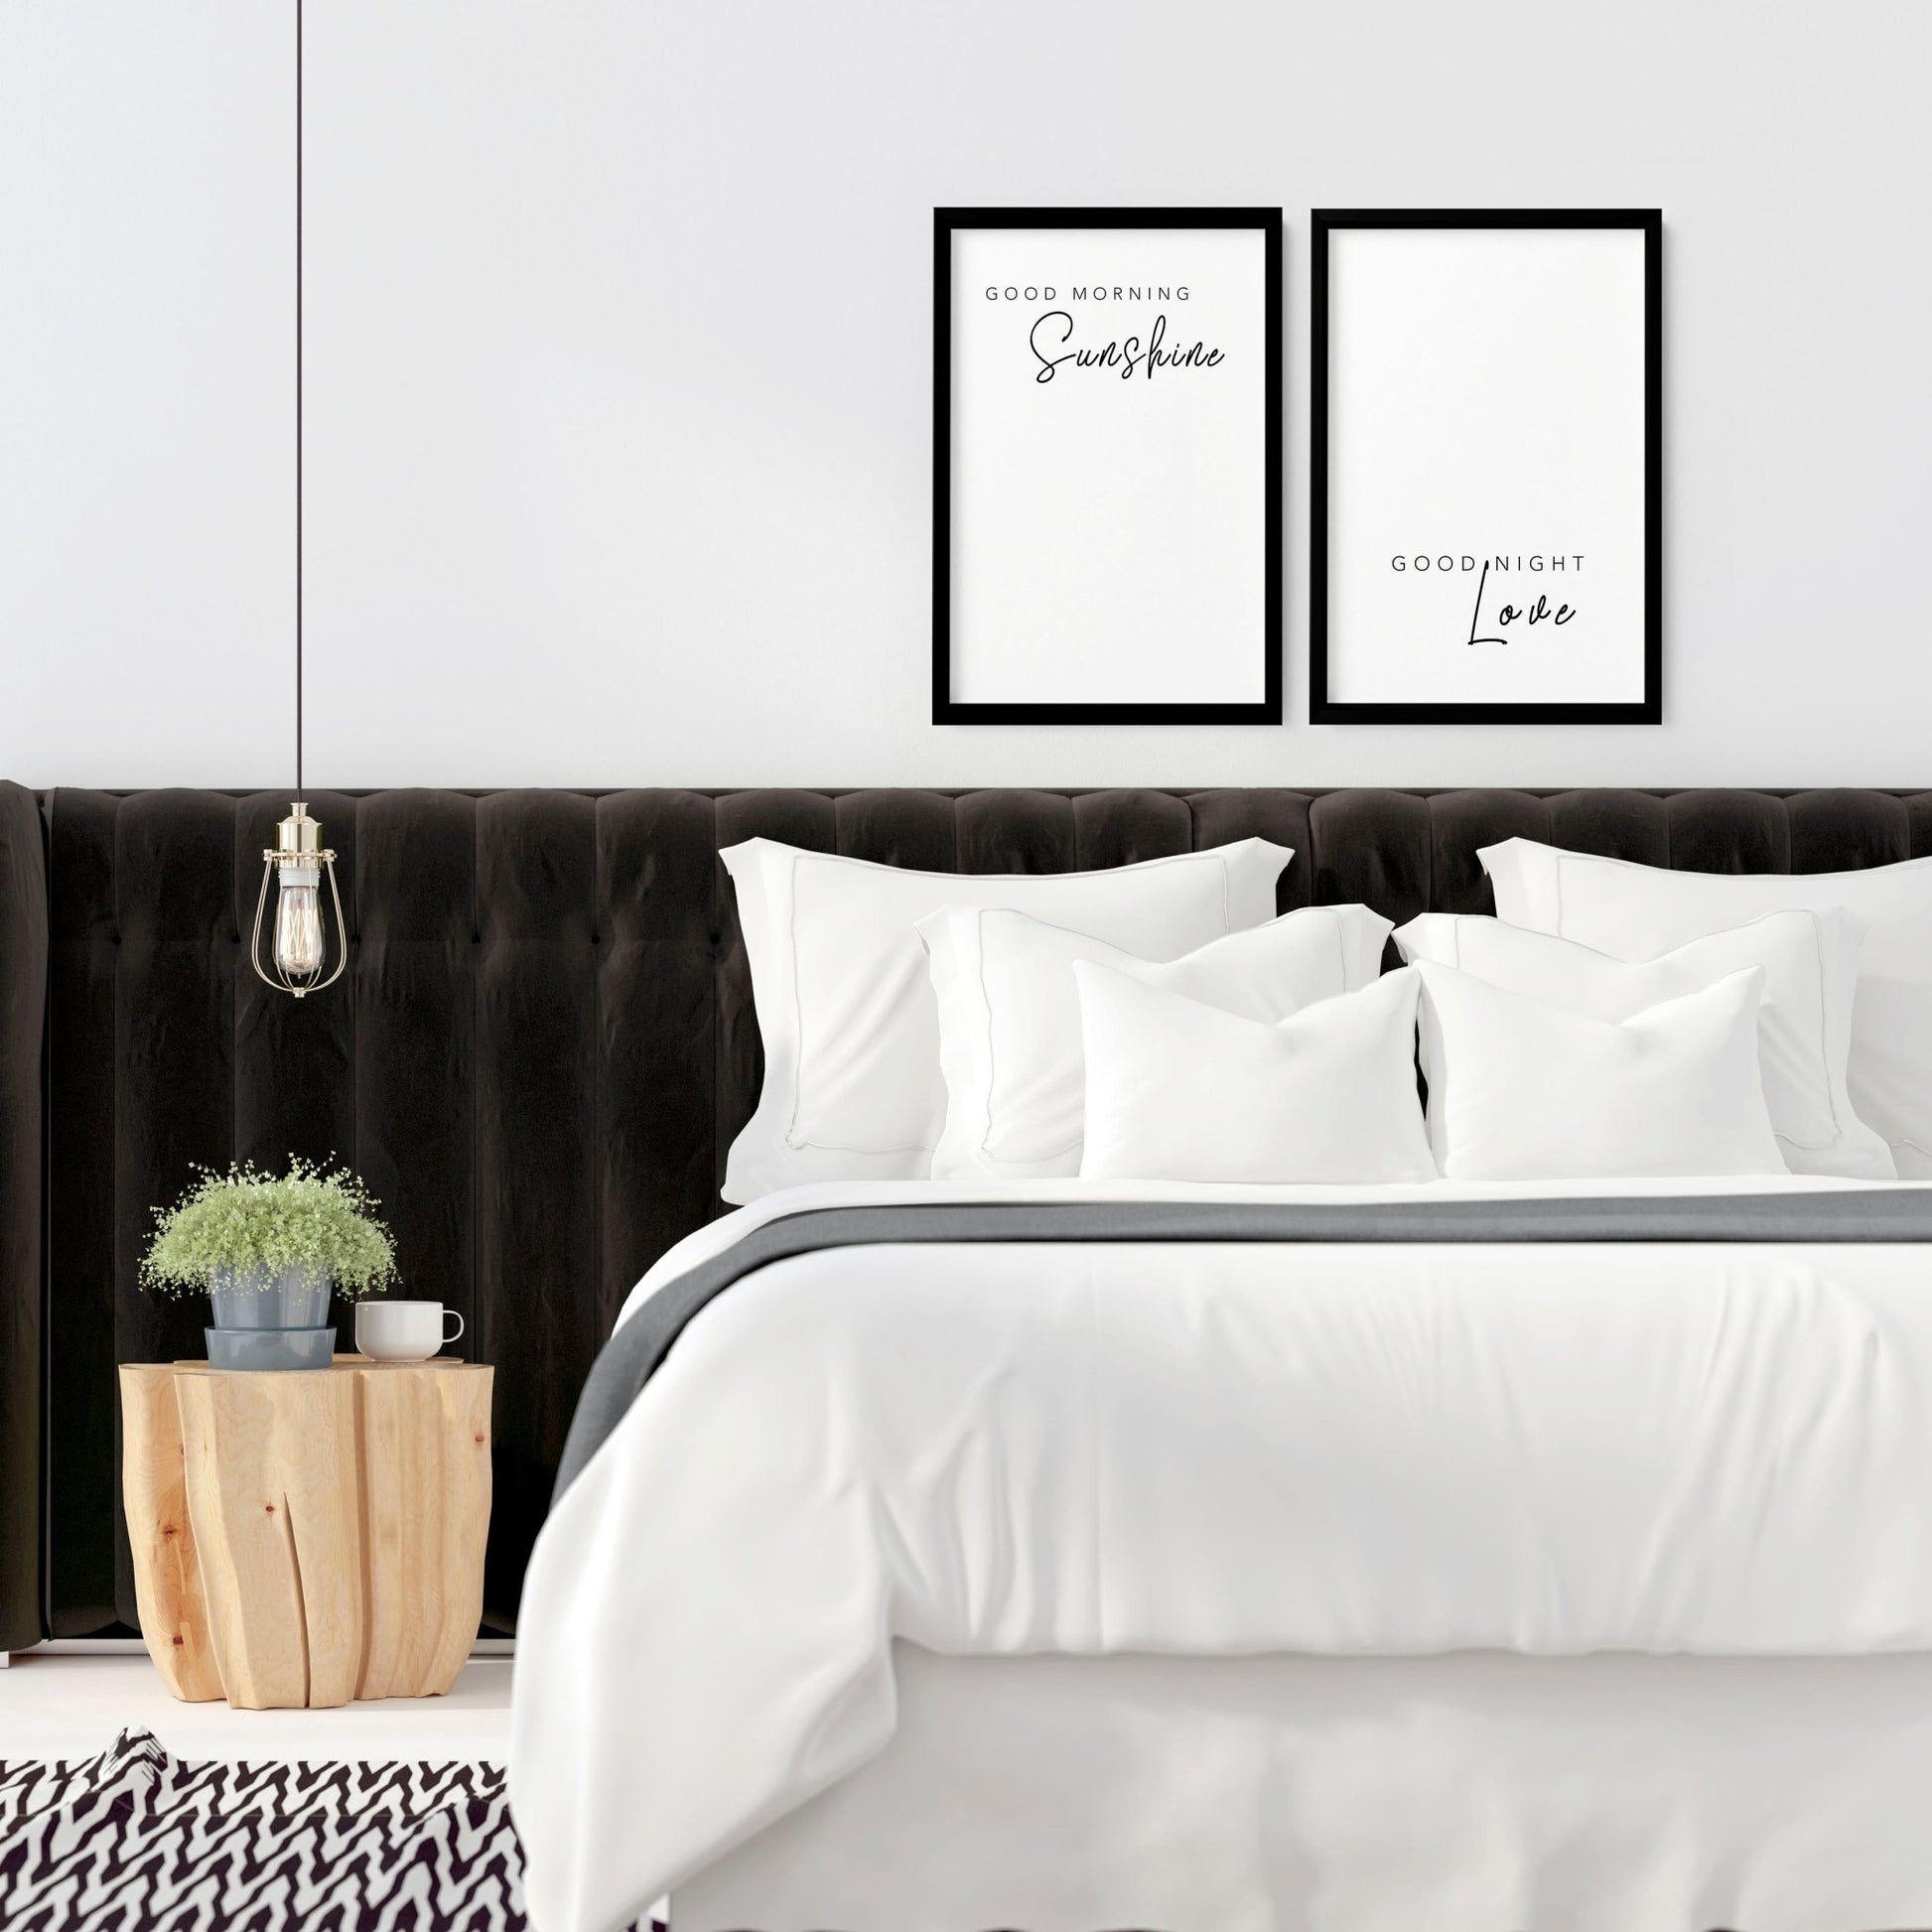 First anniversary gifts| set of 2 wall art prints for Master Bedroom - About Wall Art